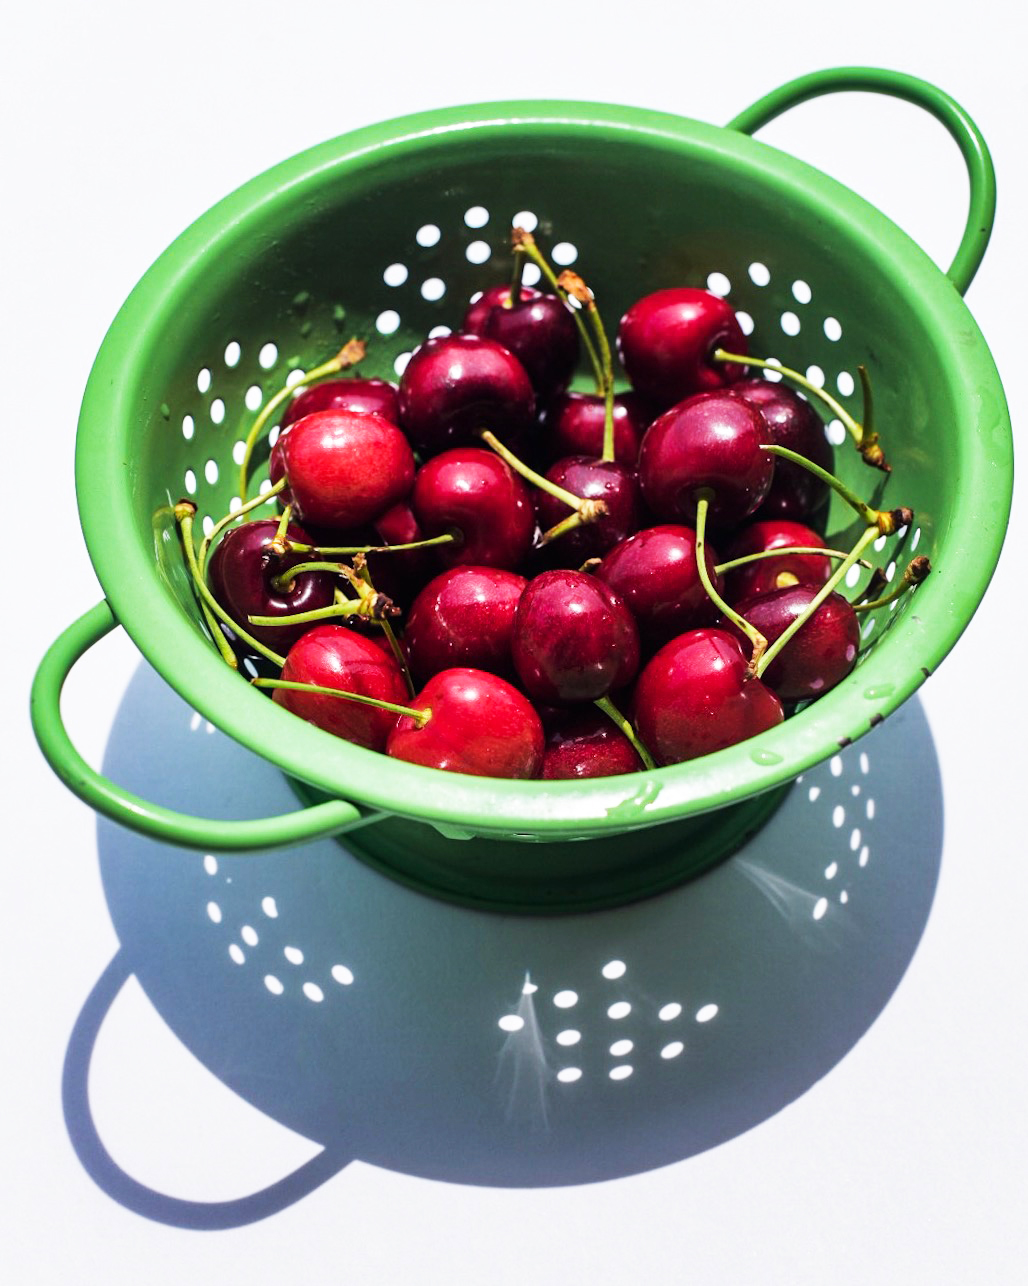 A basket of early summer cherries